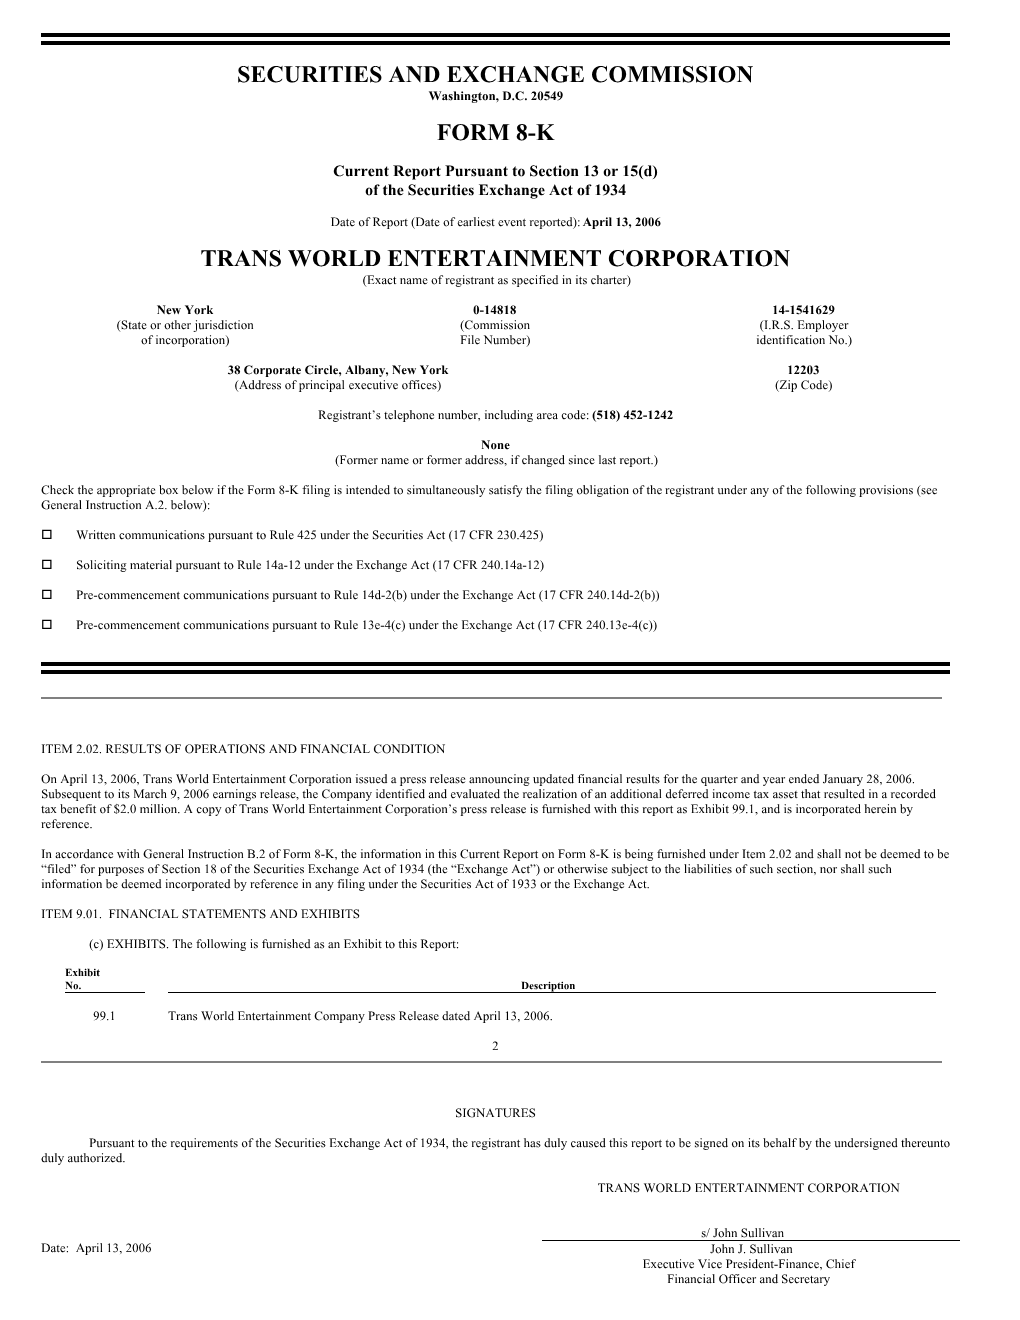 Securities and Exchange Commission Form 8-K Trans